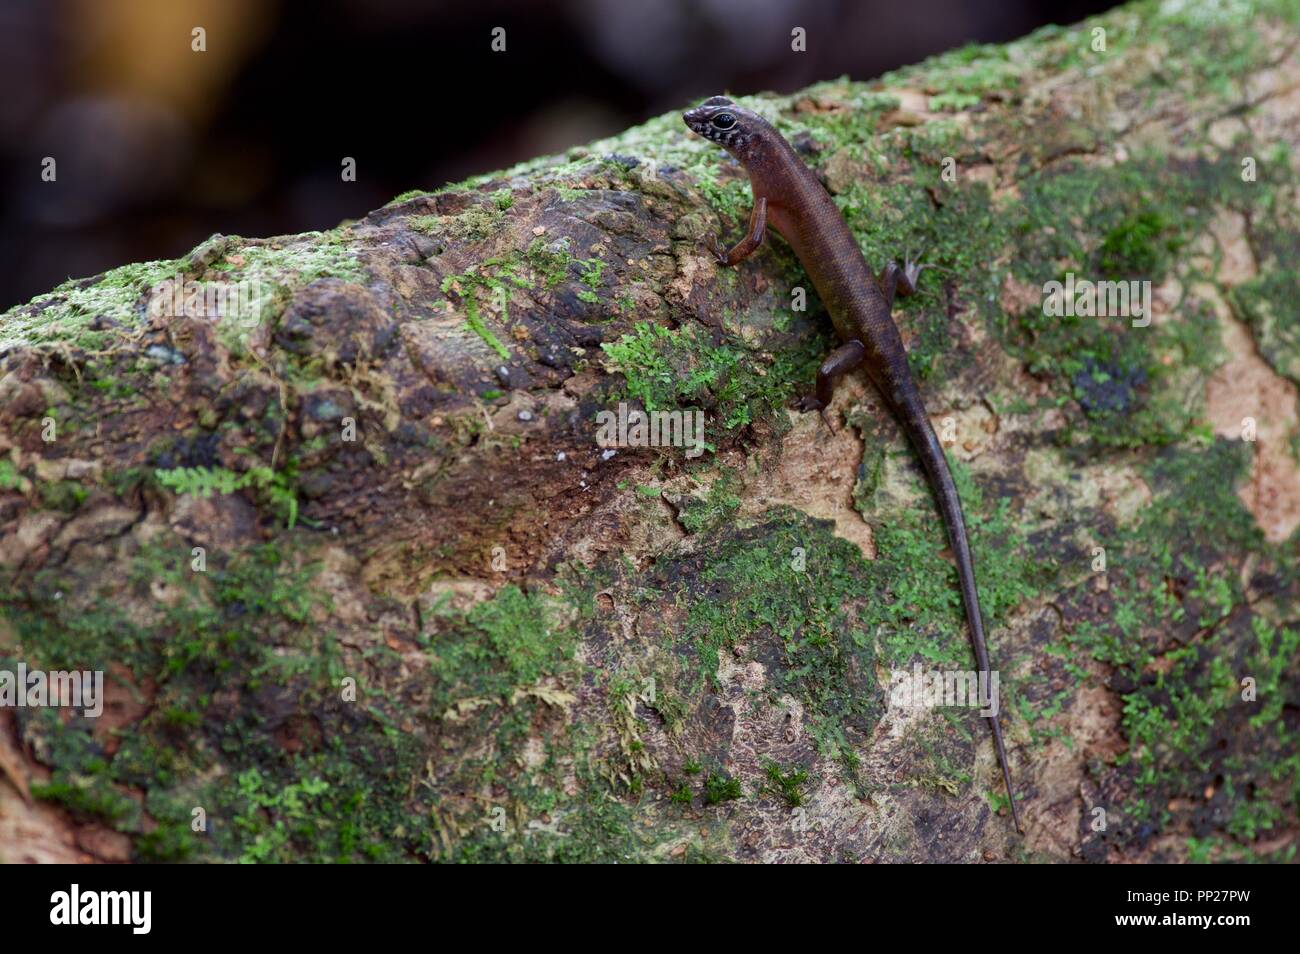 A Sabah Slender Skink (Sphenomorphus sabanus) perched on a mossy log in Danum Valley Conservation Area, Sabah, East Malaysia, Borneo Stock Photo